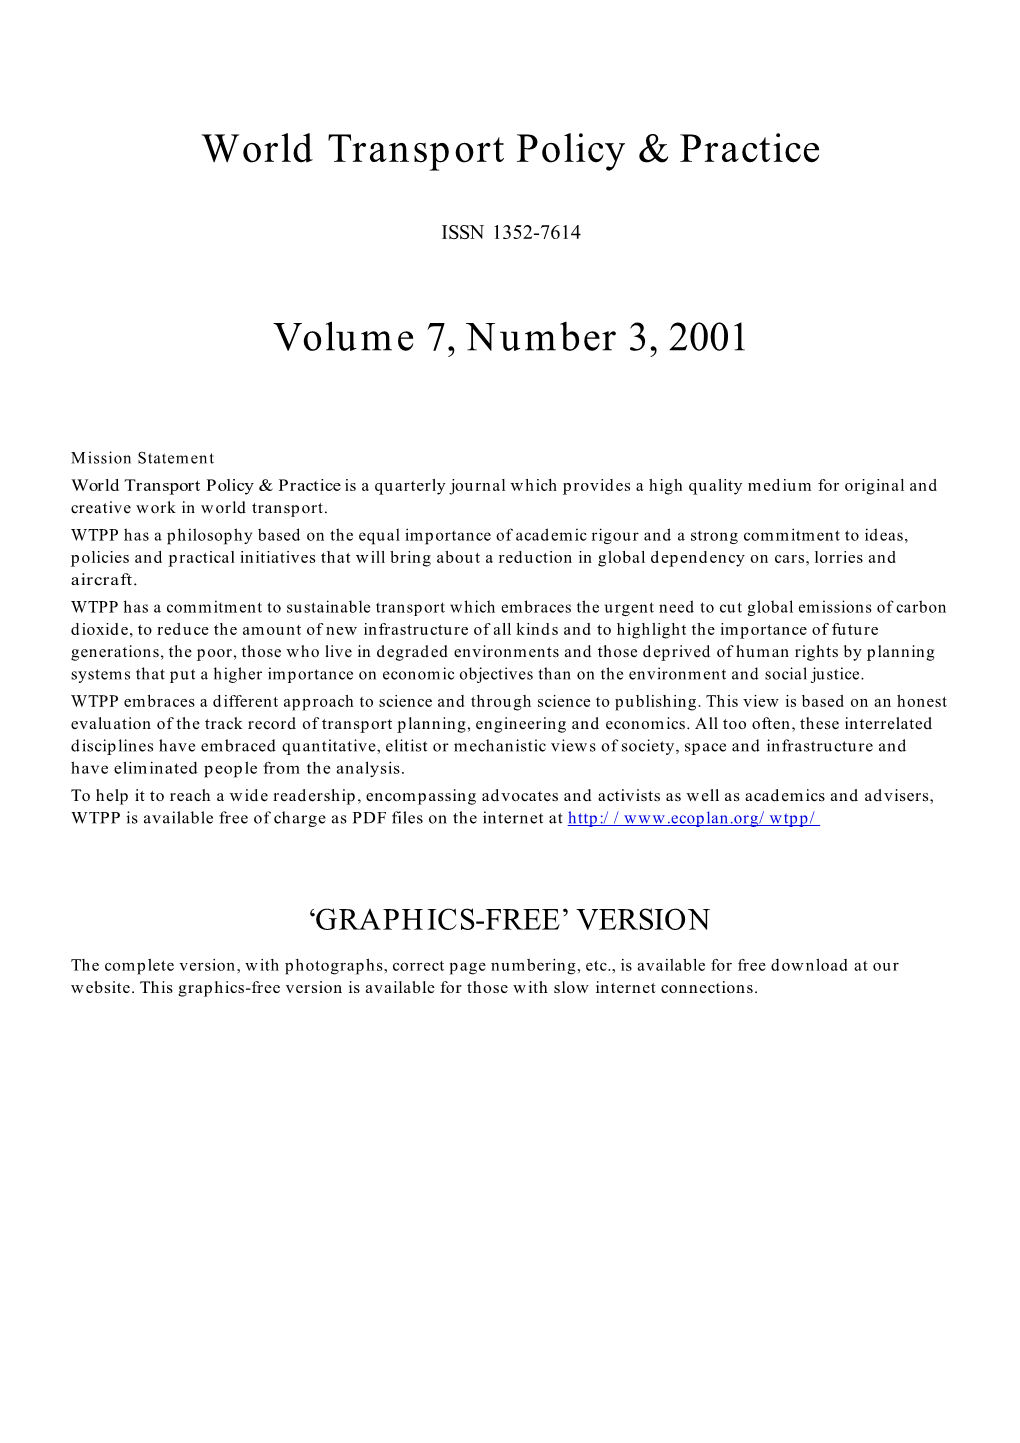 World Transport Policy & Practice Volume 7, Number 3, 2001